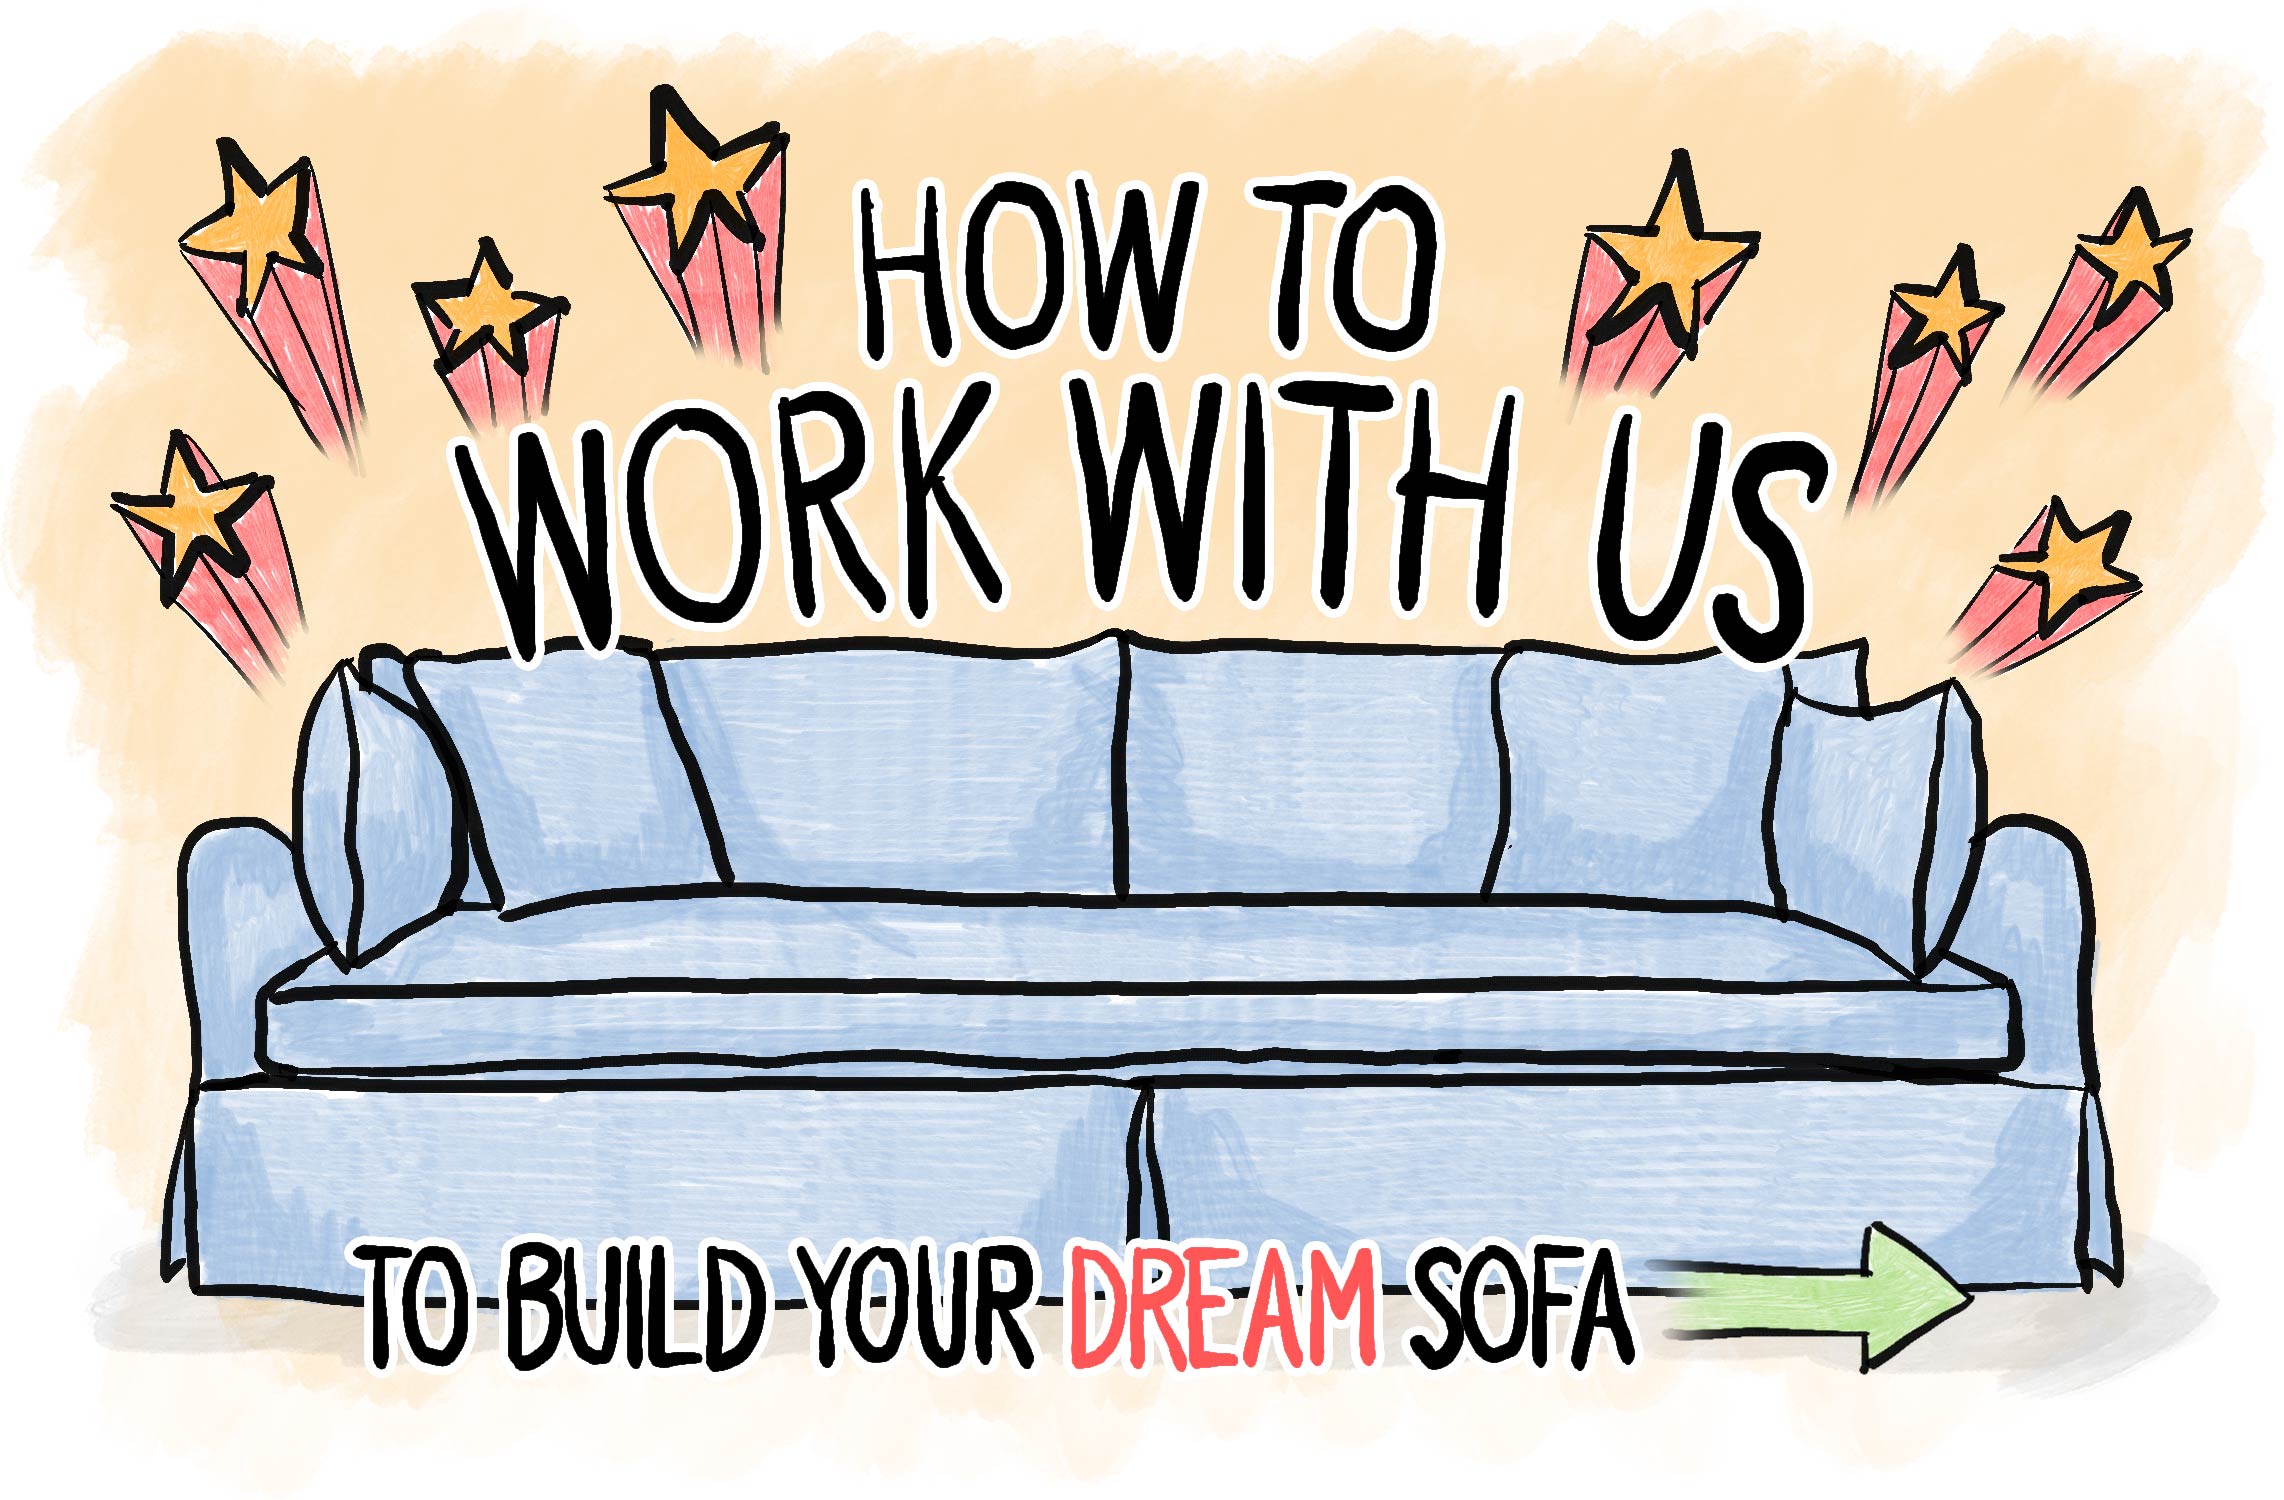 How To Work With Us To Build Your Dream Sofa